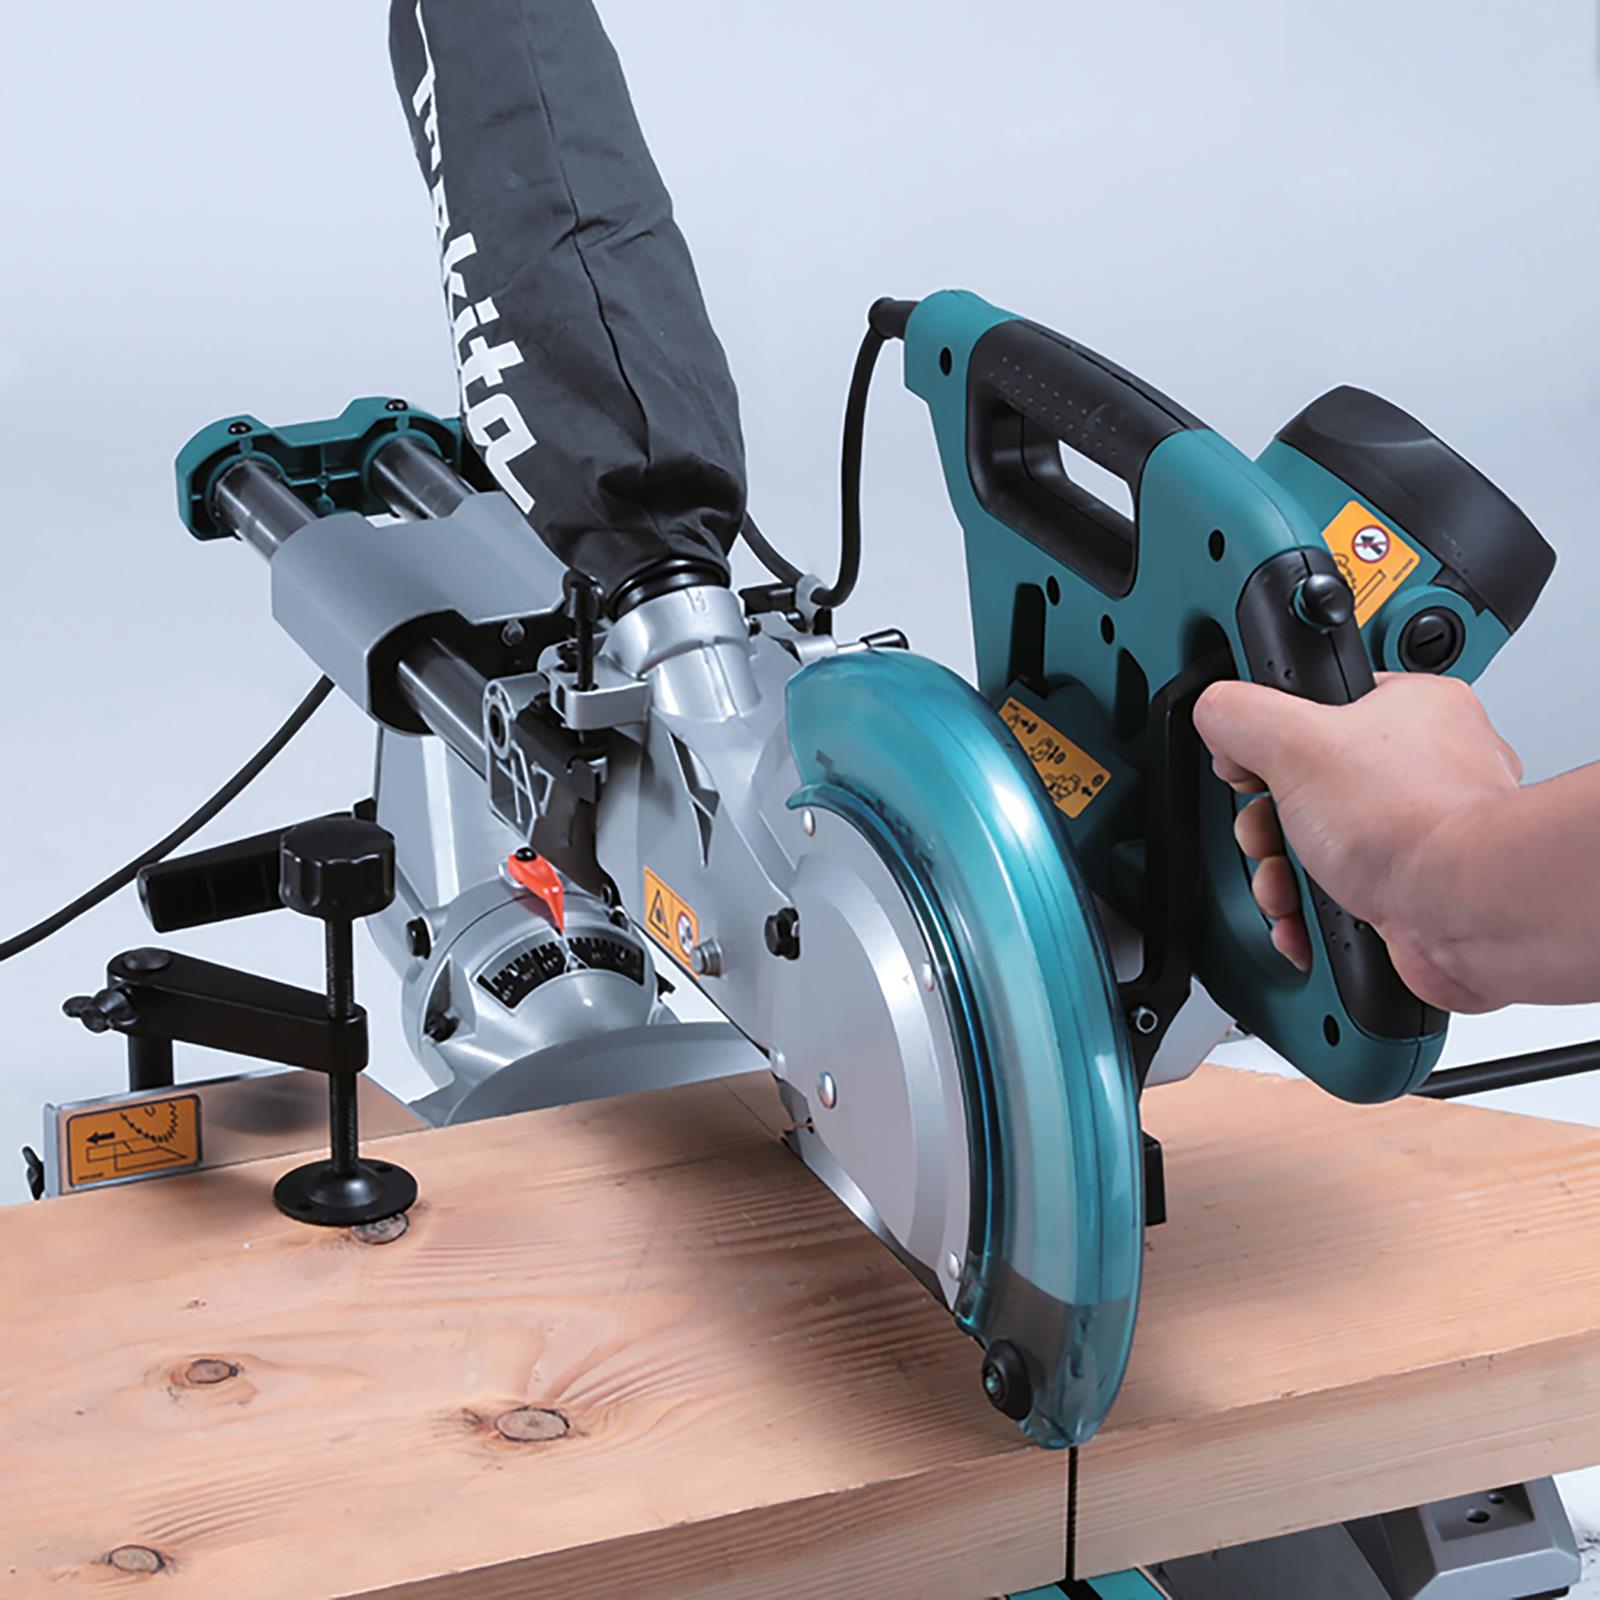 Makita Slide Compound Mitre Saw 255mm to 260mm Cutting Blade 230V